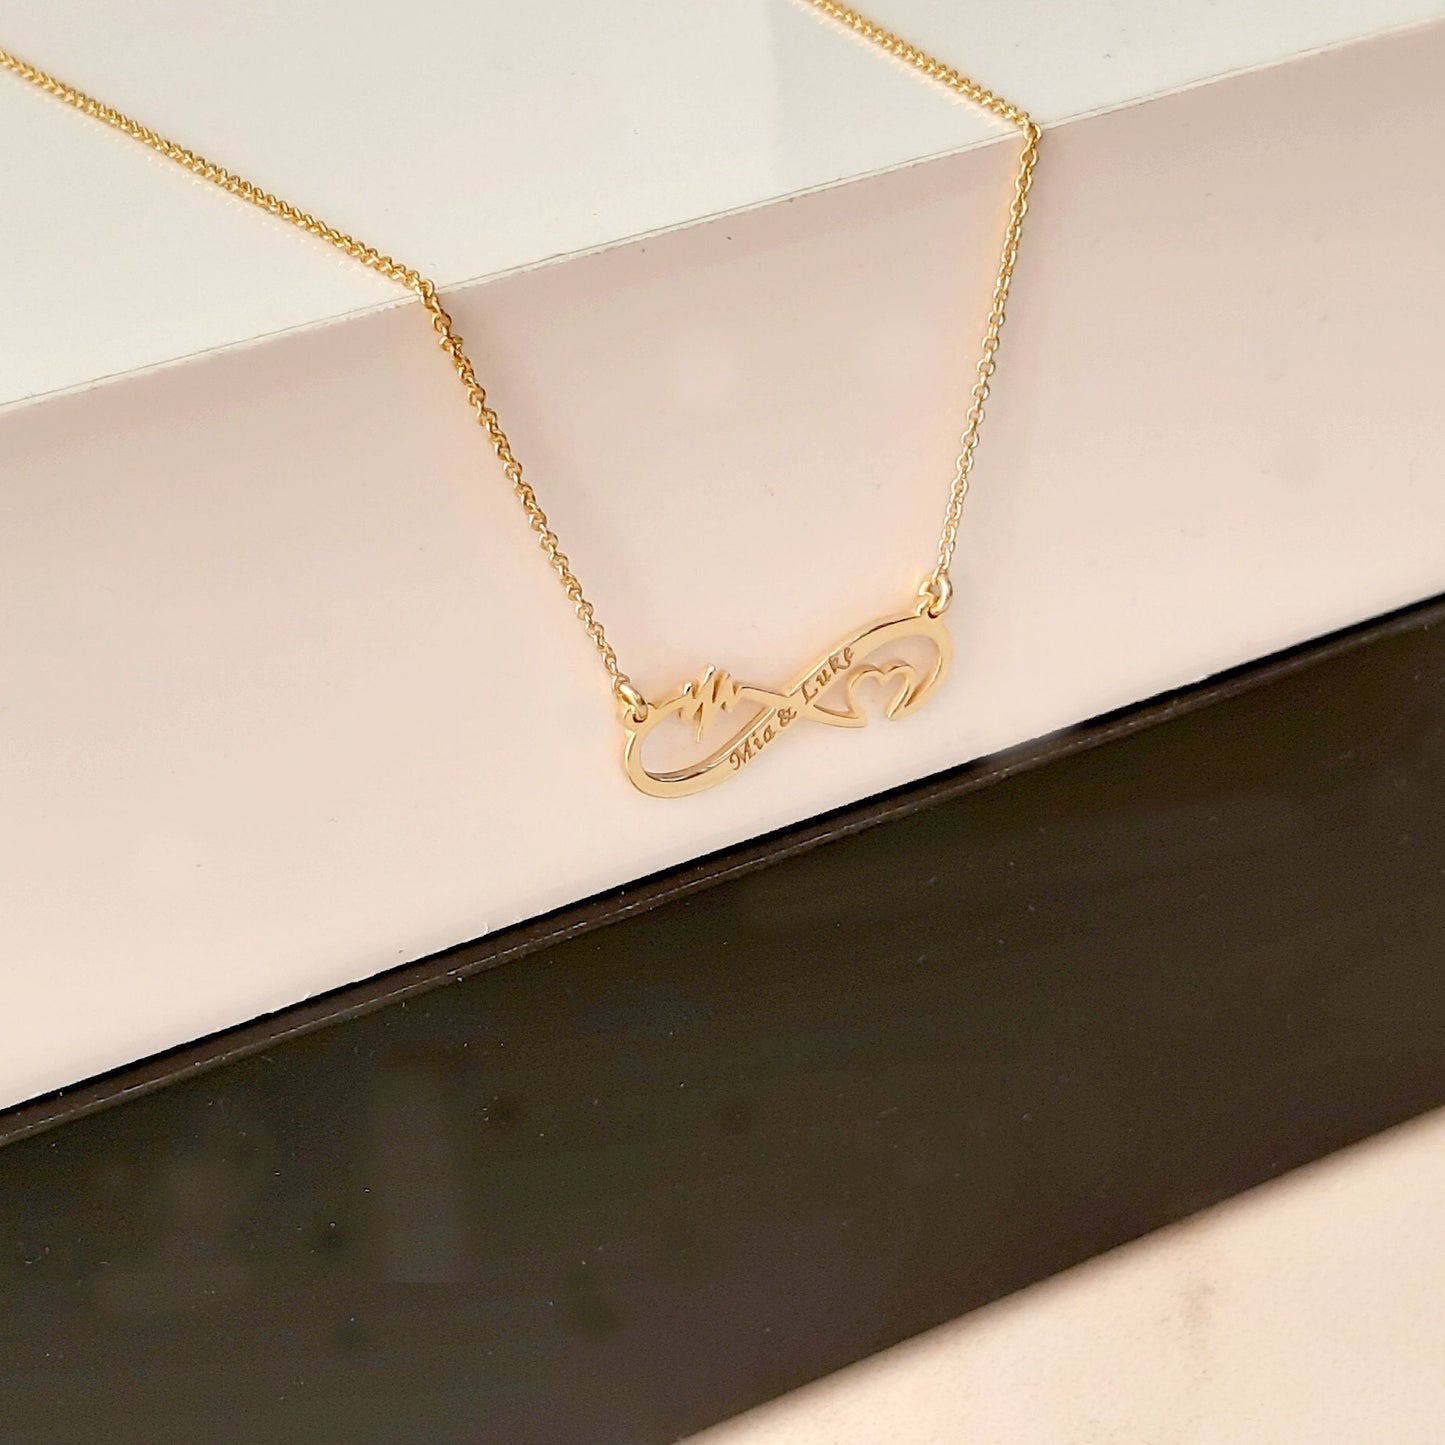 Personalized infinity Necklace, 14K Solid Gold Infinity Necklace, Custom Dainty Necklace, Minimalist, Handmade Jewelry, Necklace for women